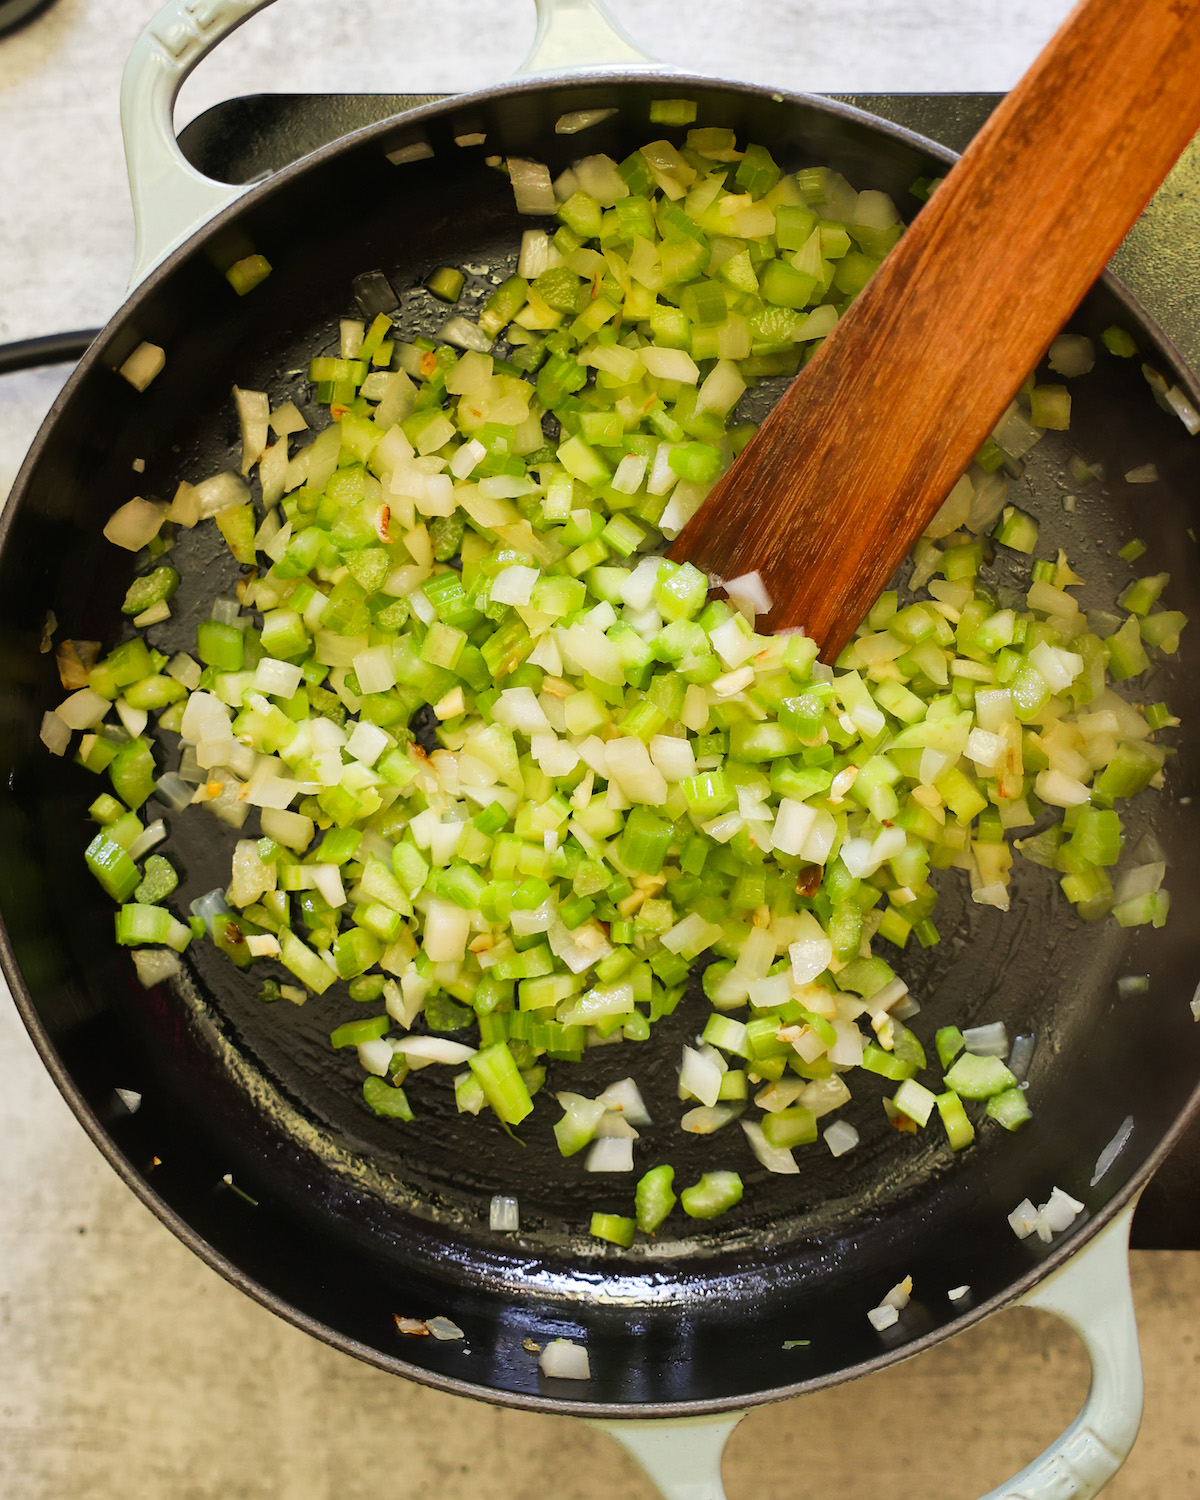 onions and celery sautéing in a black skillet